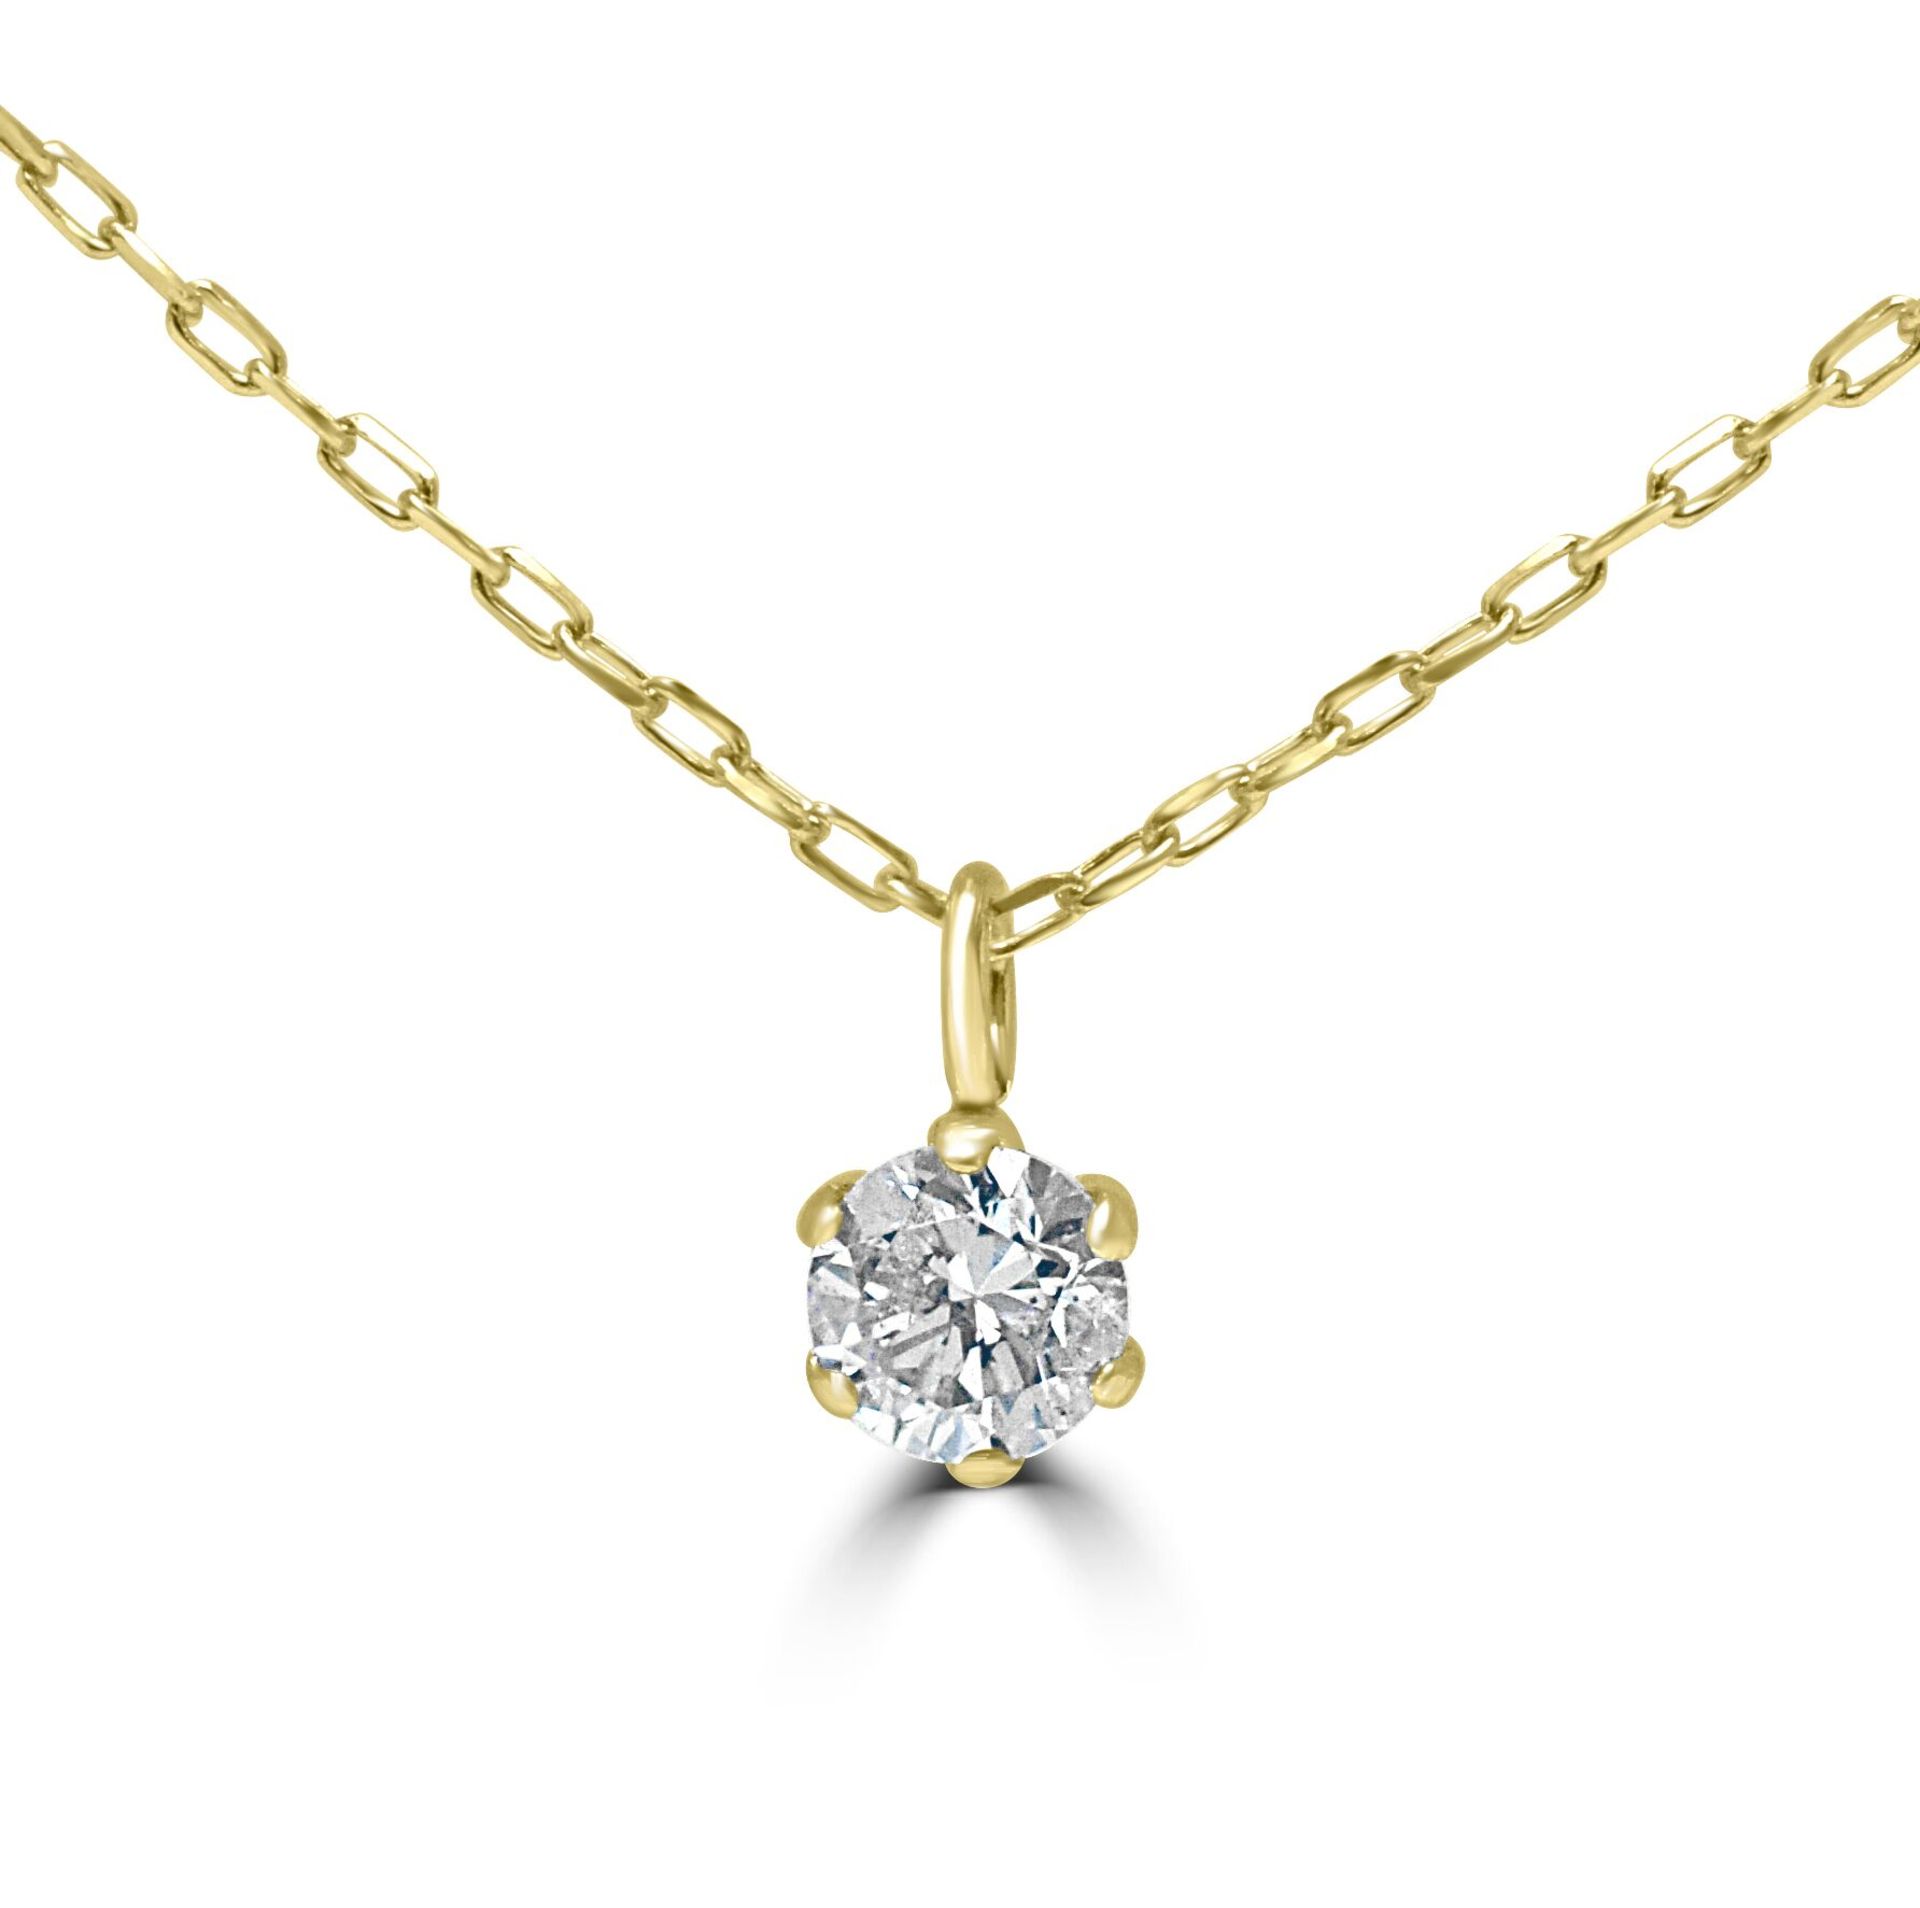 Cute Diamond Pendant Necklace In 18ct Yellow Gold With 16 Inch Chain RRP £375